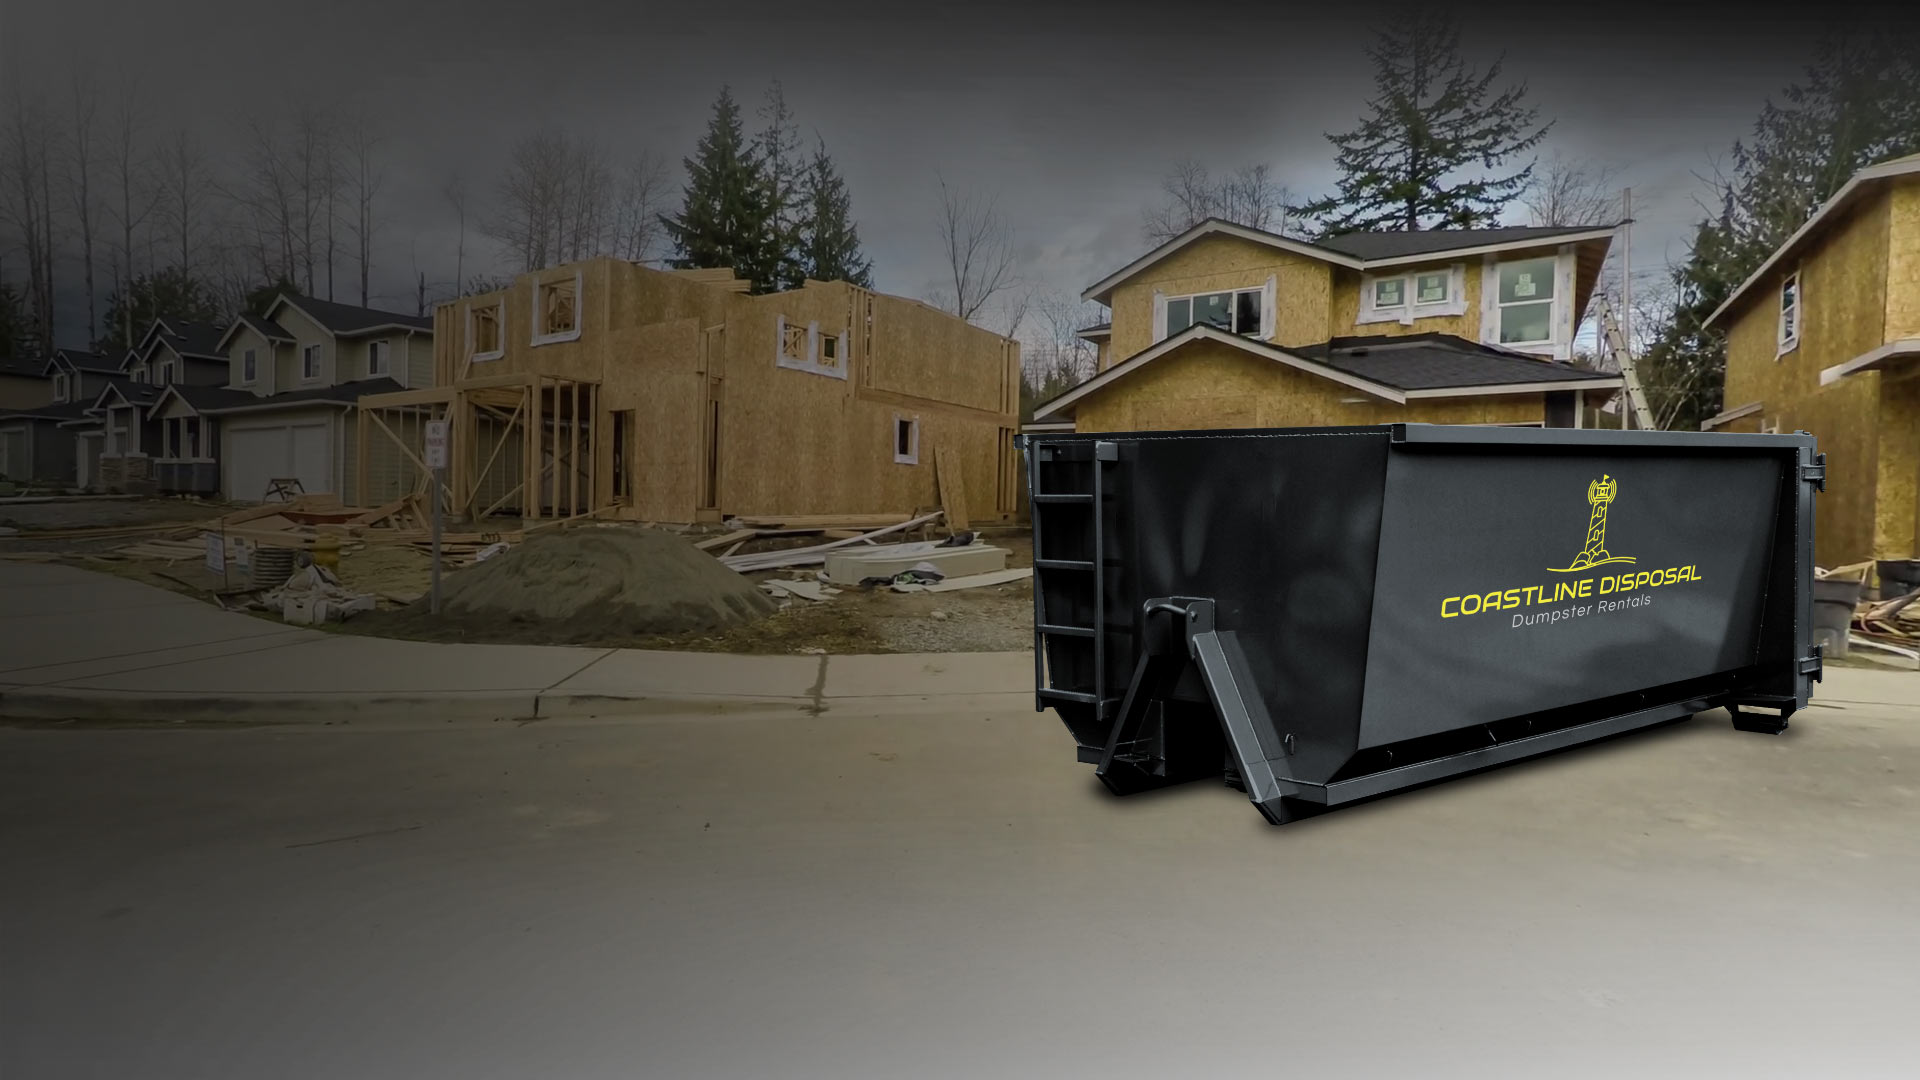 Commercial Dumpster Rental Cape Cod MA